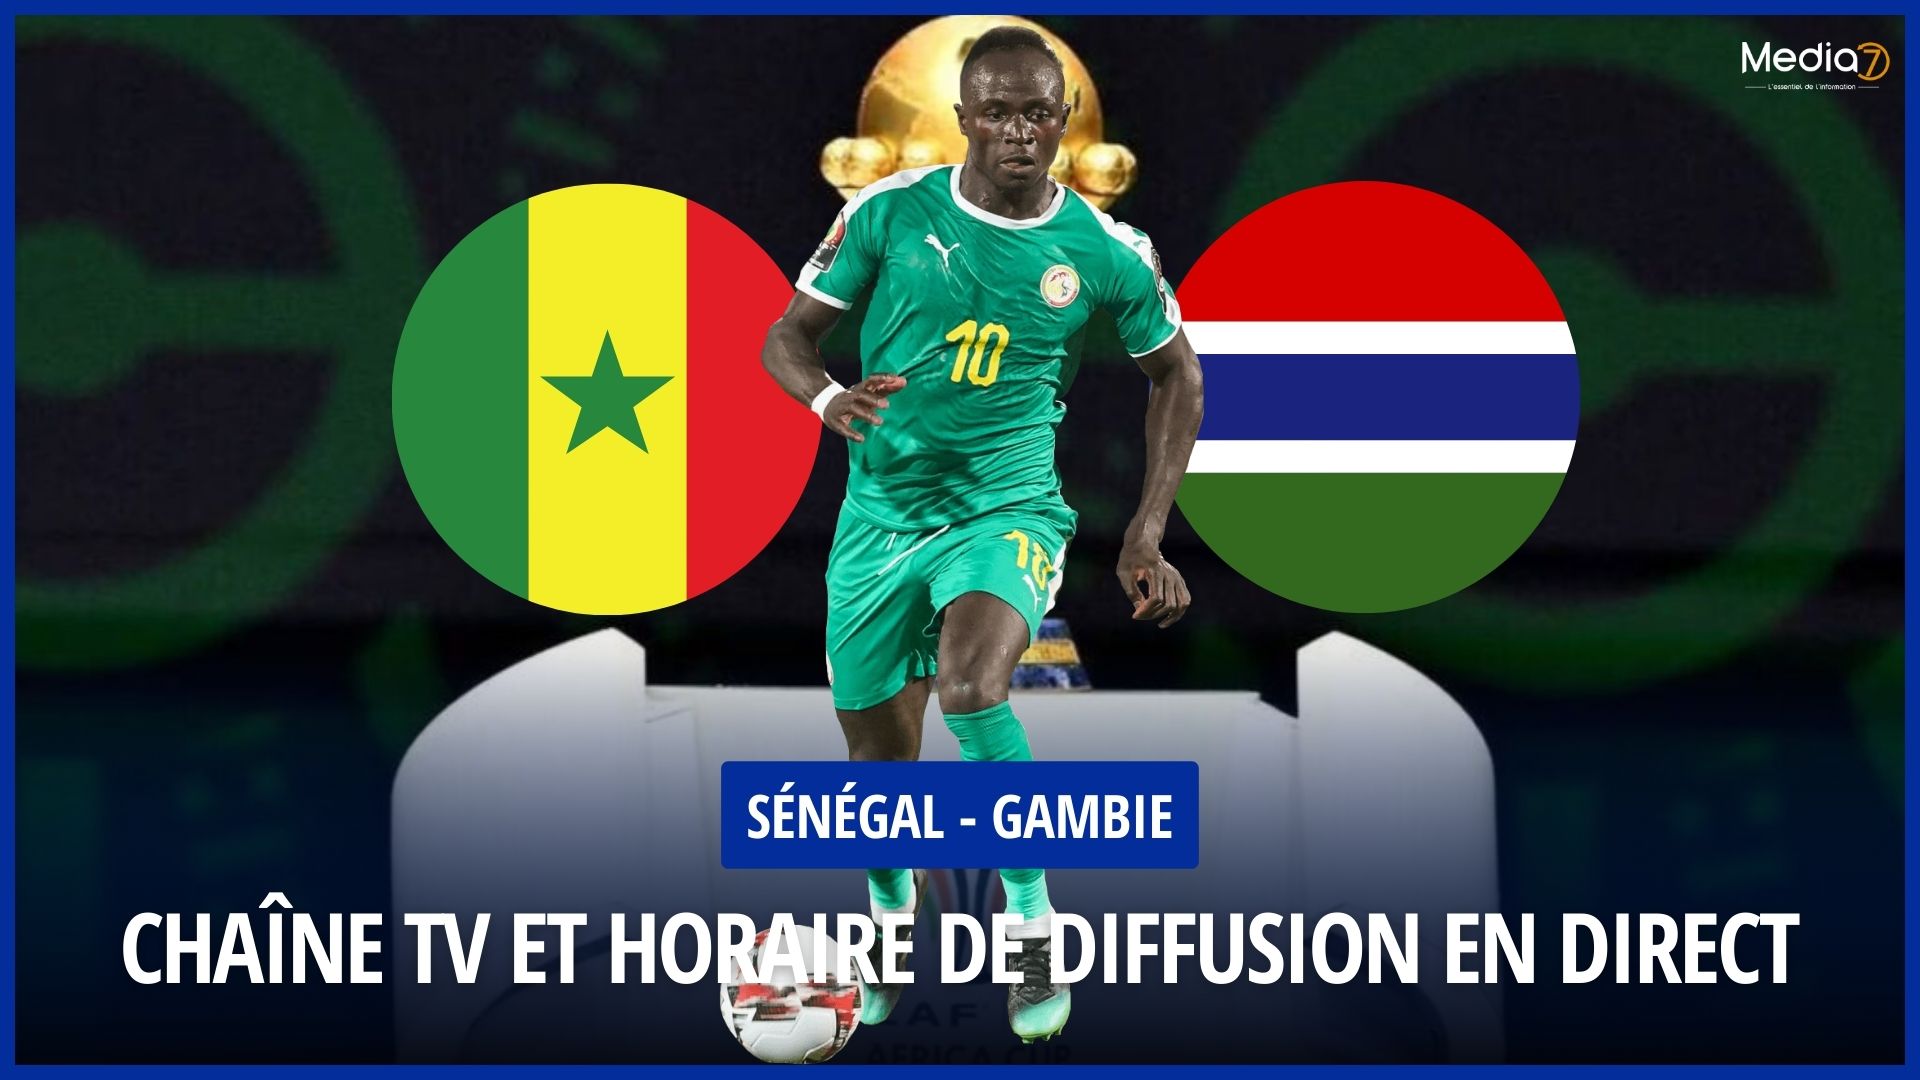 Senegal - Gambia match live: TV Channel and Broadcast Time - Media7